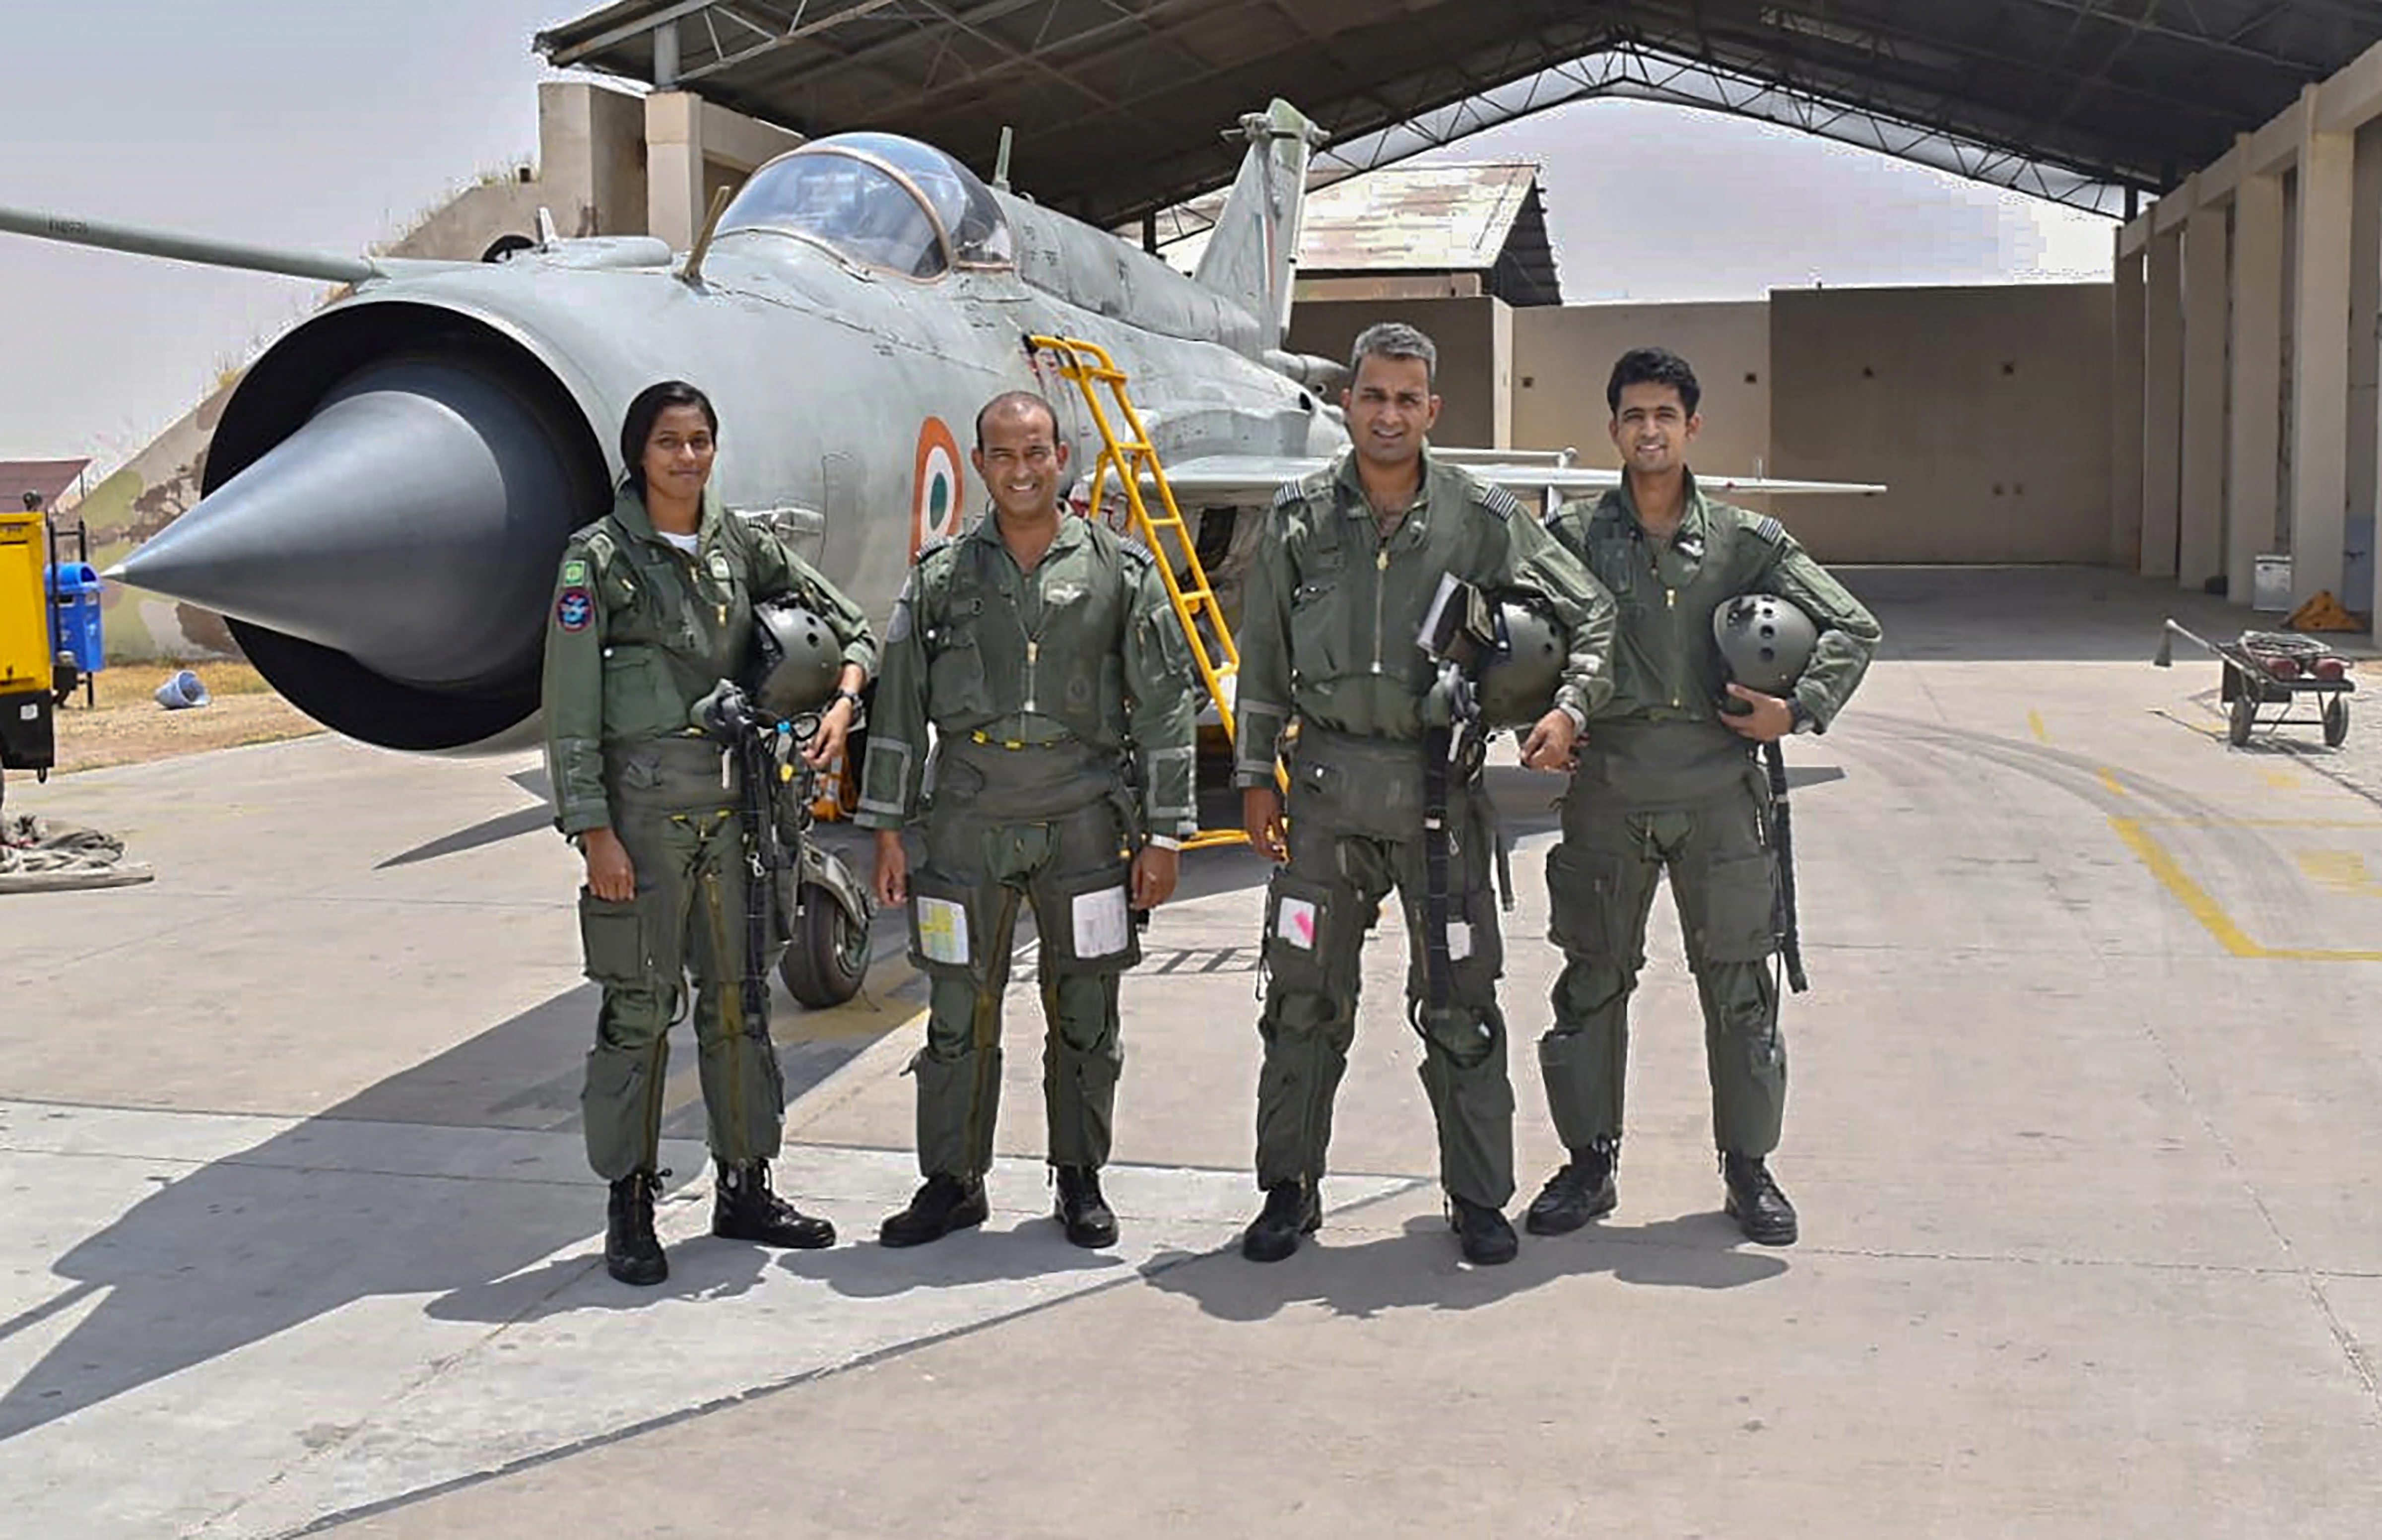 Flt Lt Bhawana Kanth (L) poses for photos as she completes Day operational syllabus on MiG-21 Bison aircraft - PTI